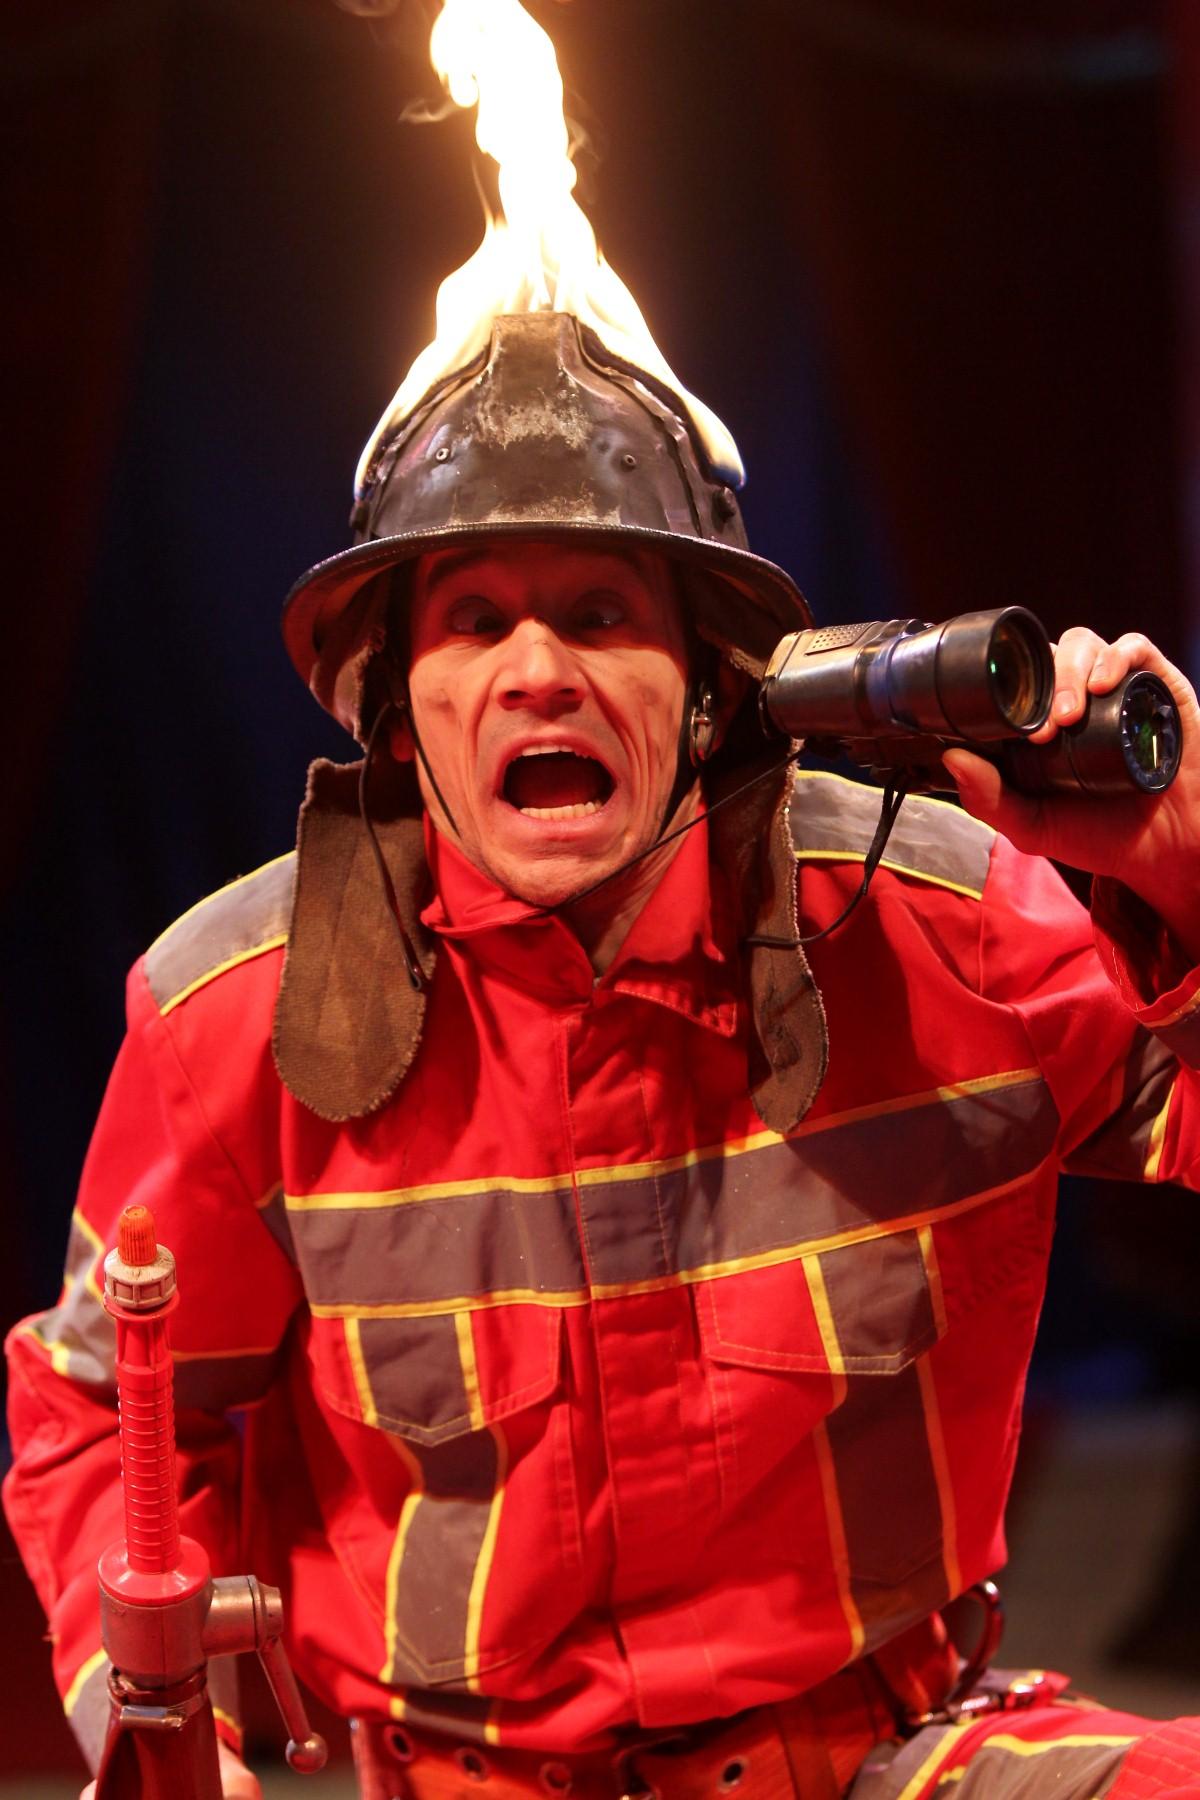 The Year in Pictures - 2013 -  Alex the Fireman at Billy Smart's circus, Mayflower Park. April 9, 2013.